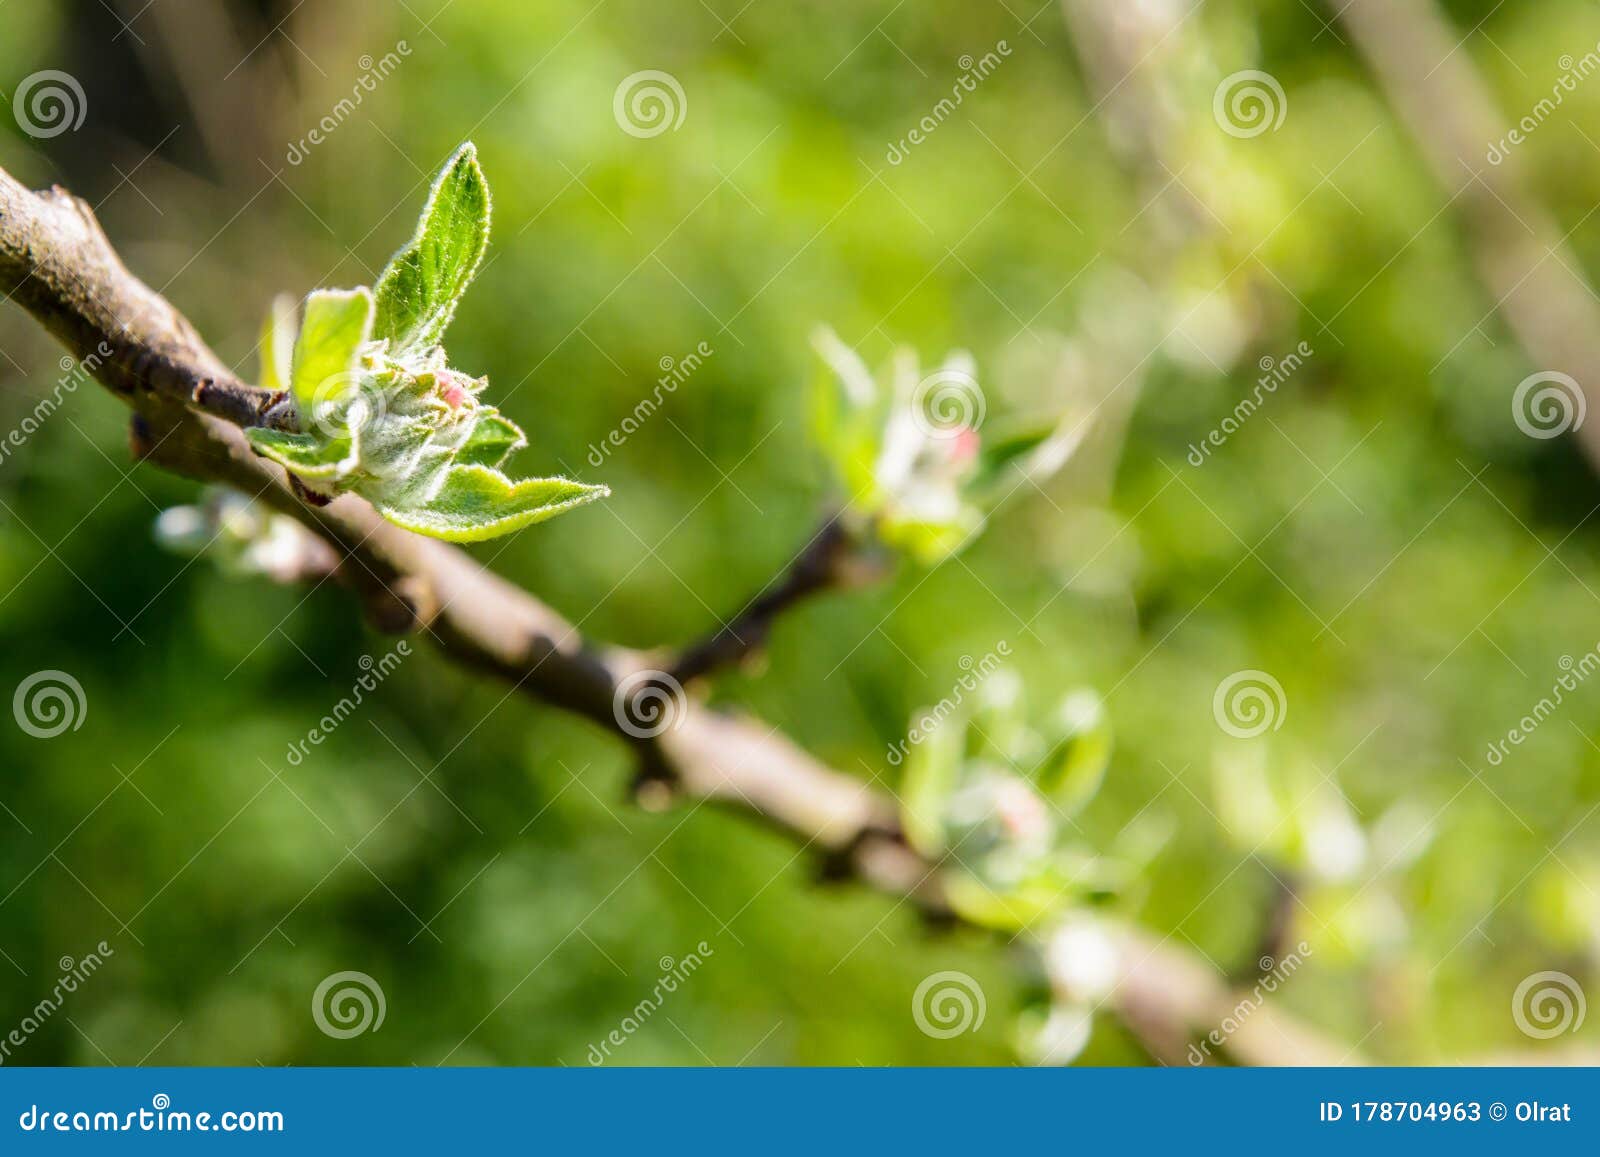 close-up view of apple tree buds about to hatch at springtime